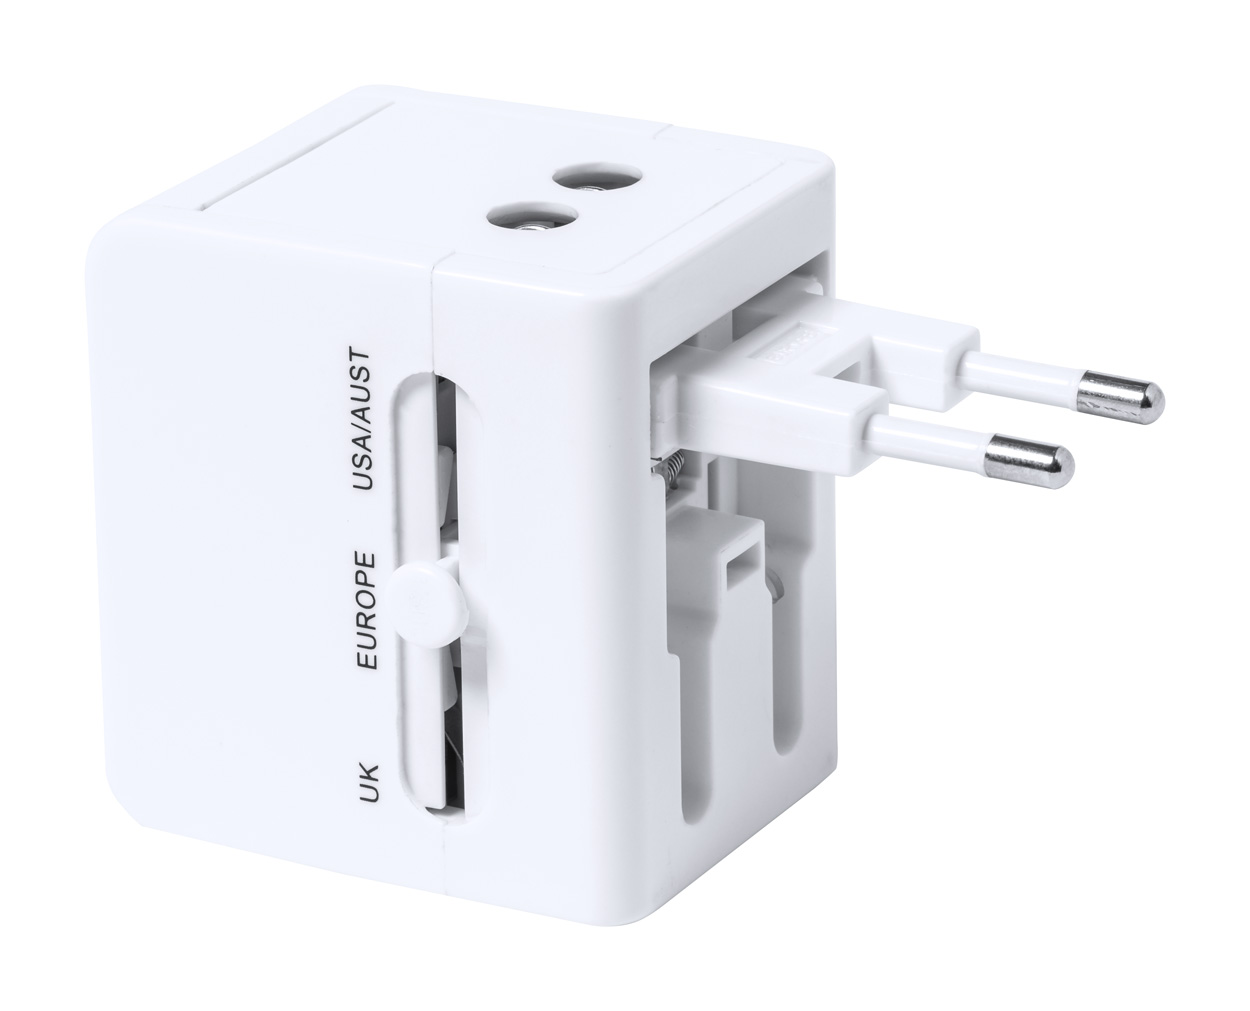 Plastic travel adapter BEIGAR with USB ports - white